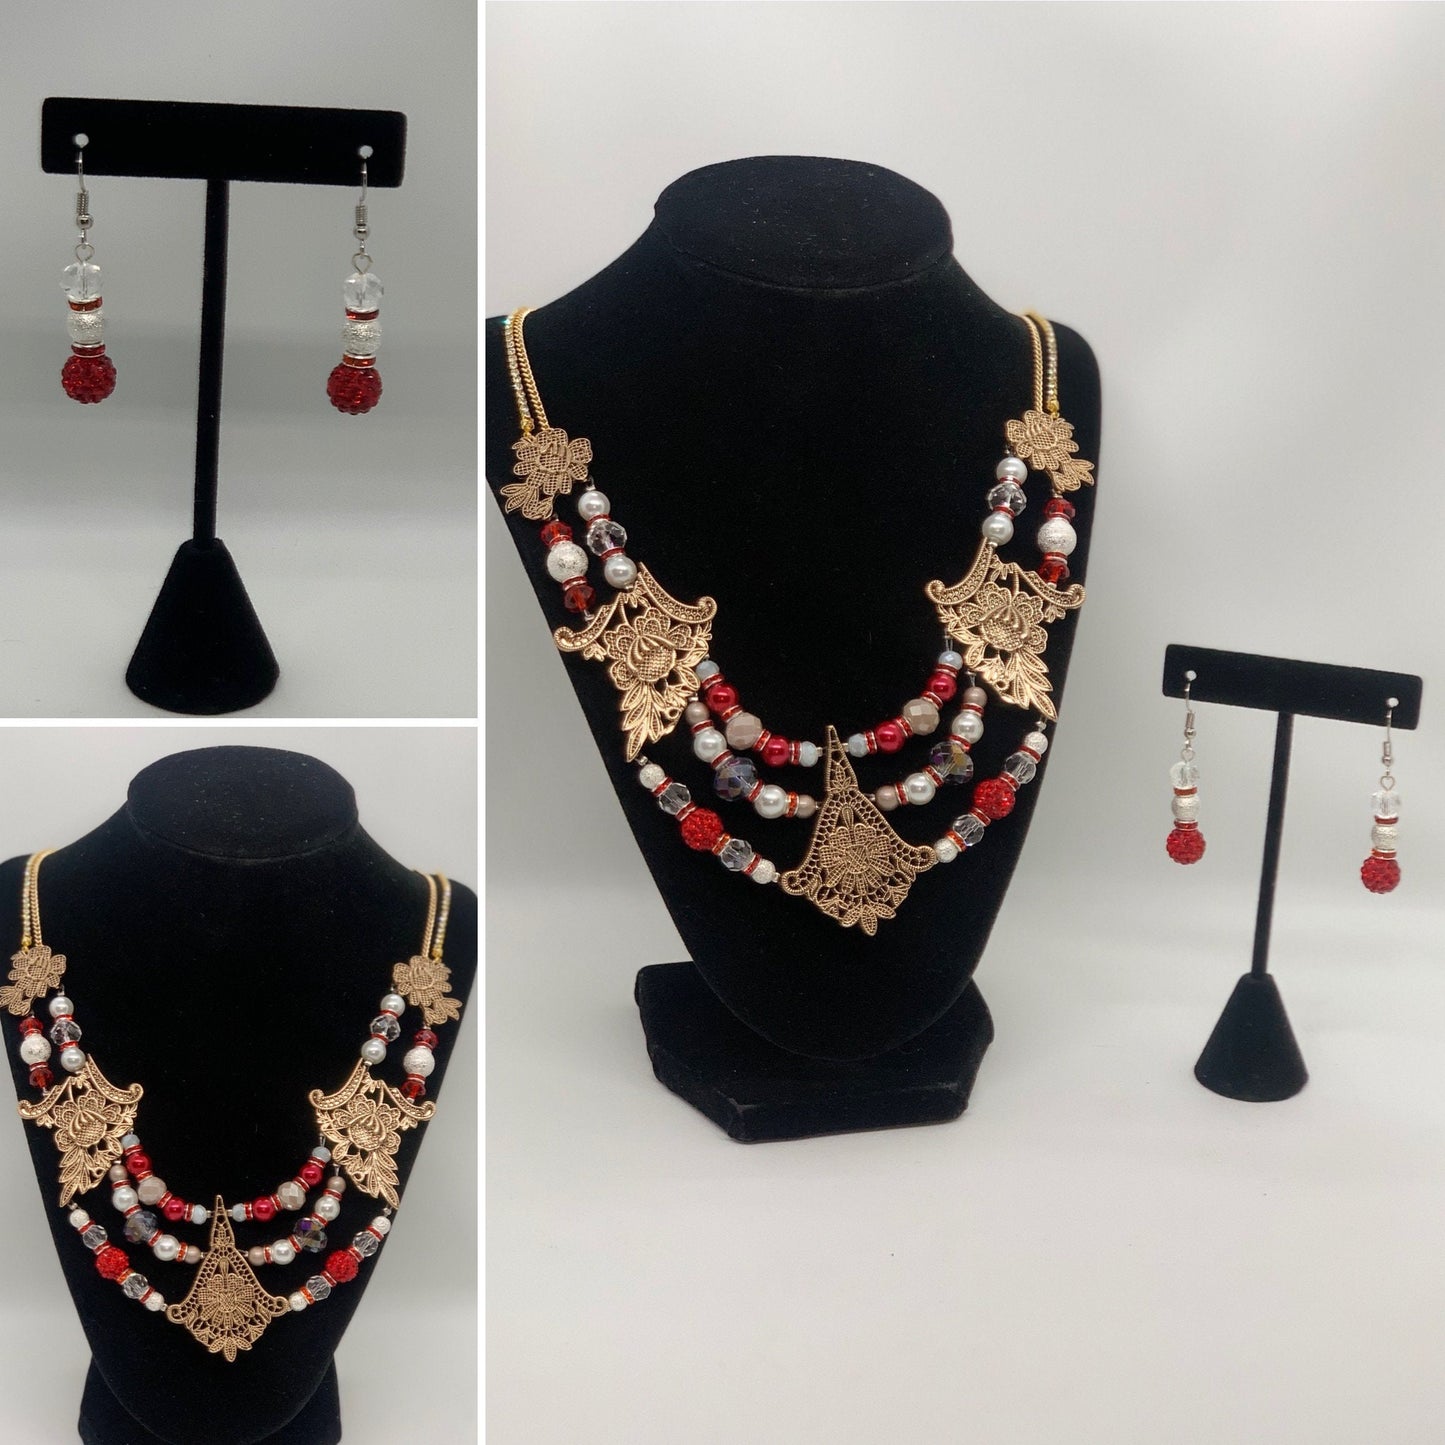 Vintage style necklace with matching earrings-One of Kind-Evie